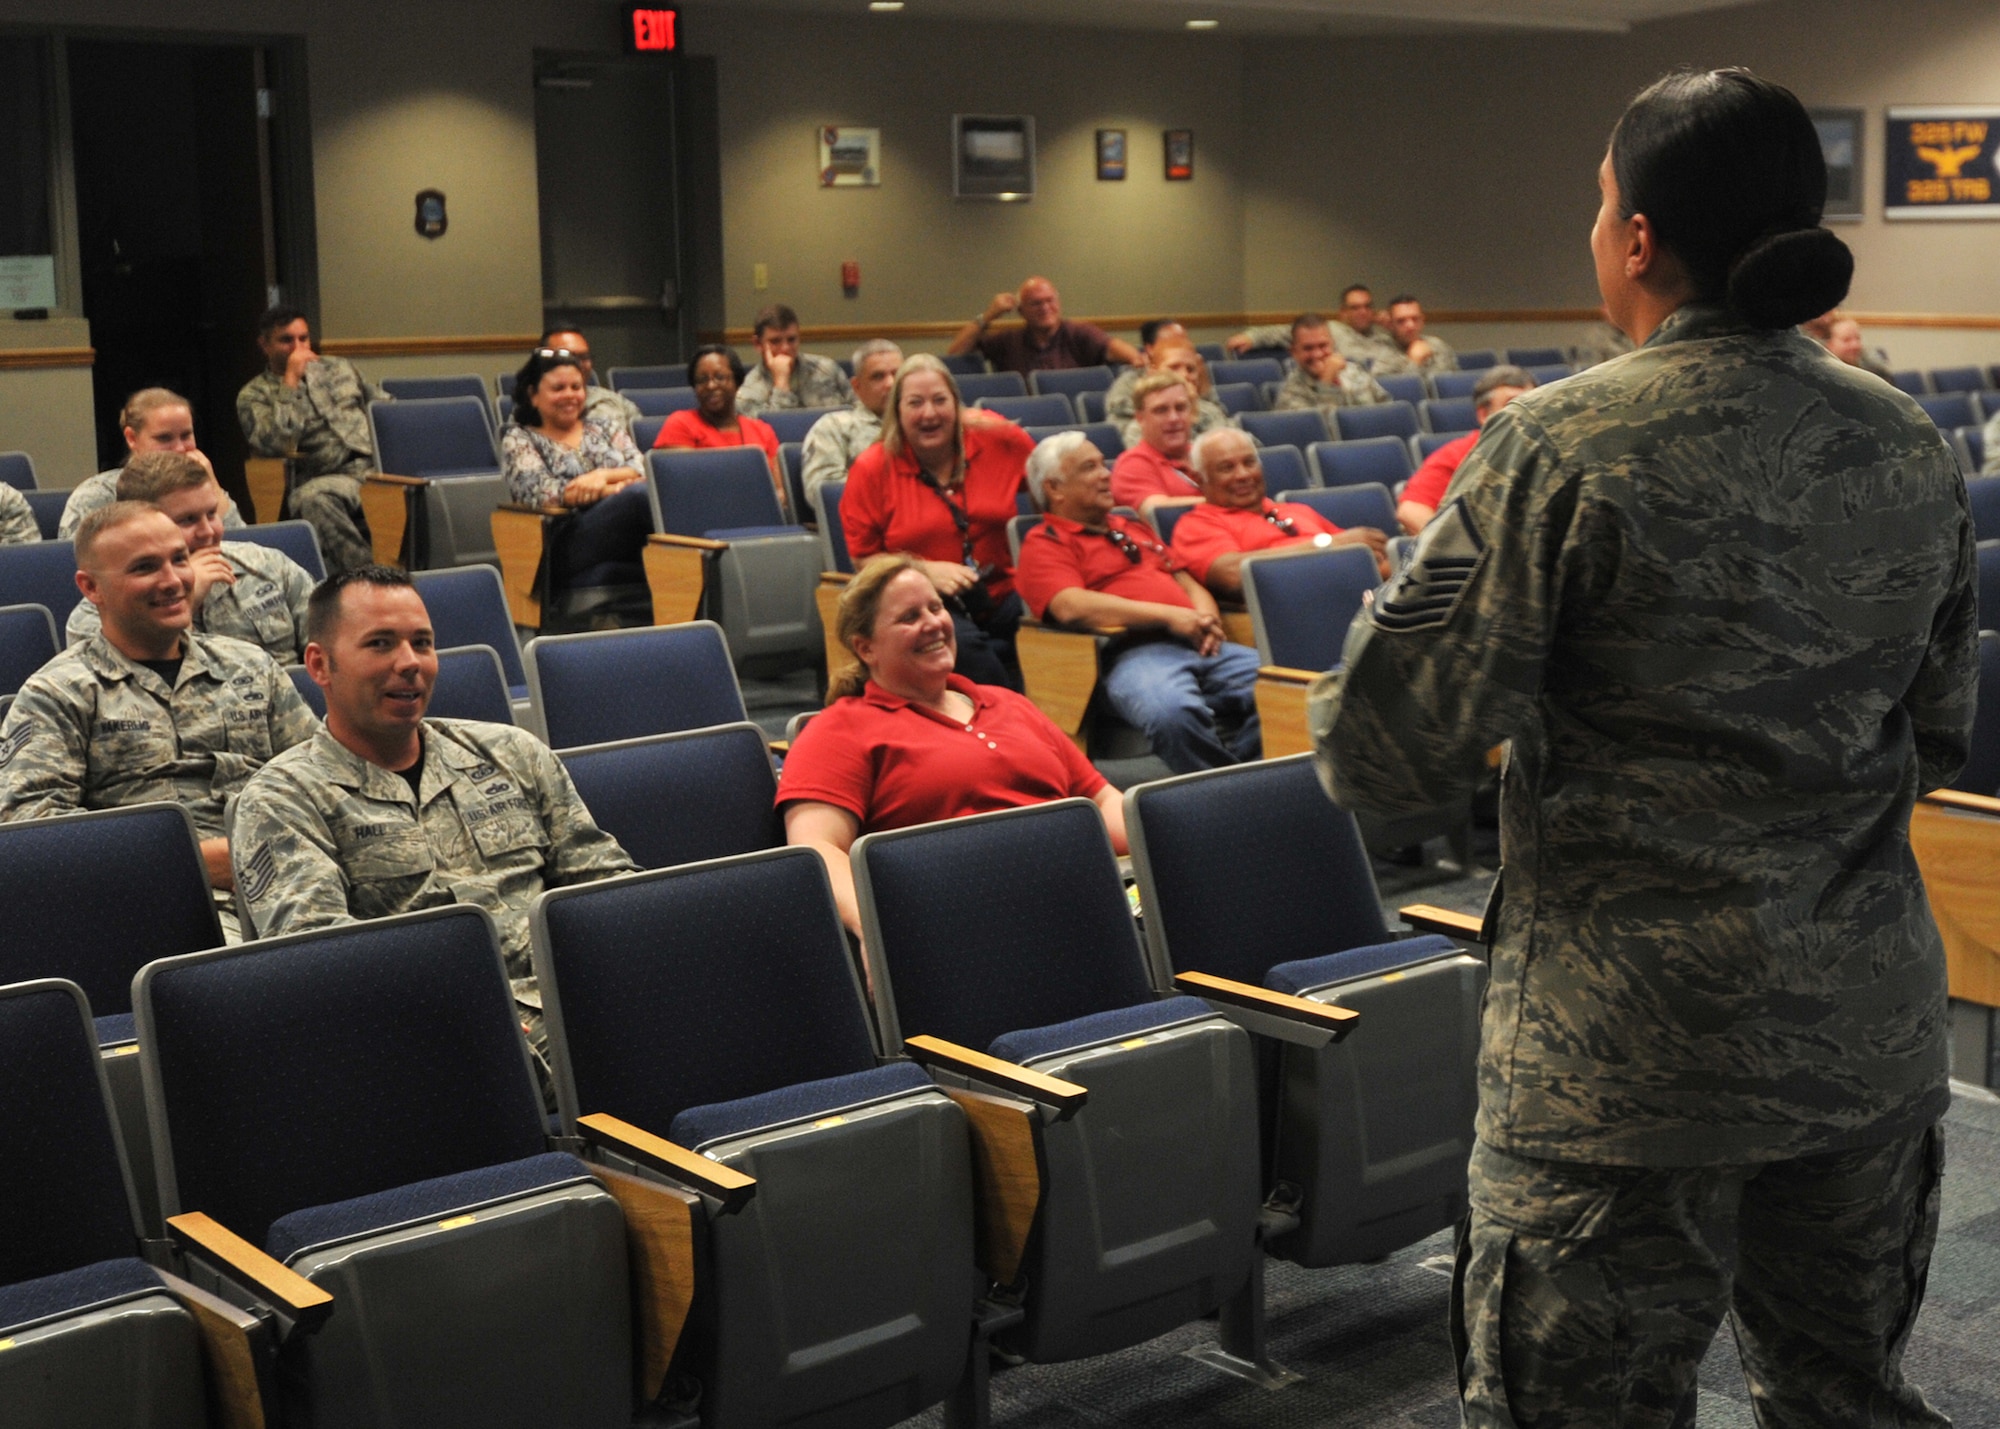 U.S. Air Force Master Sgt. Samantha Whitfield, 325th Maintenance Squadron munitions inspection NCO in charge, explains the importance of Green Dot training at the 337th Air Control Squadron Dex Rogers auditorium on Tyndall AFB, Fla., Oct. 20, 2016. Department of Defense personnel are required to complete the Green Dot training no later than Dec. 31, 2016.(U.S. Air Force photo by Senior Airman Ty-Rico Lea/Released)